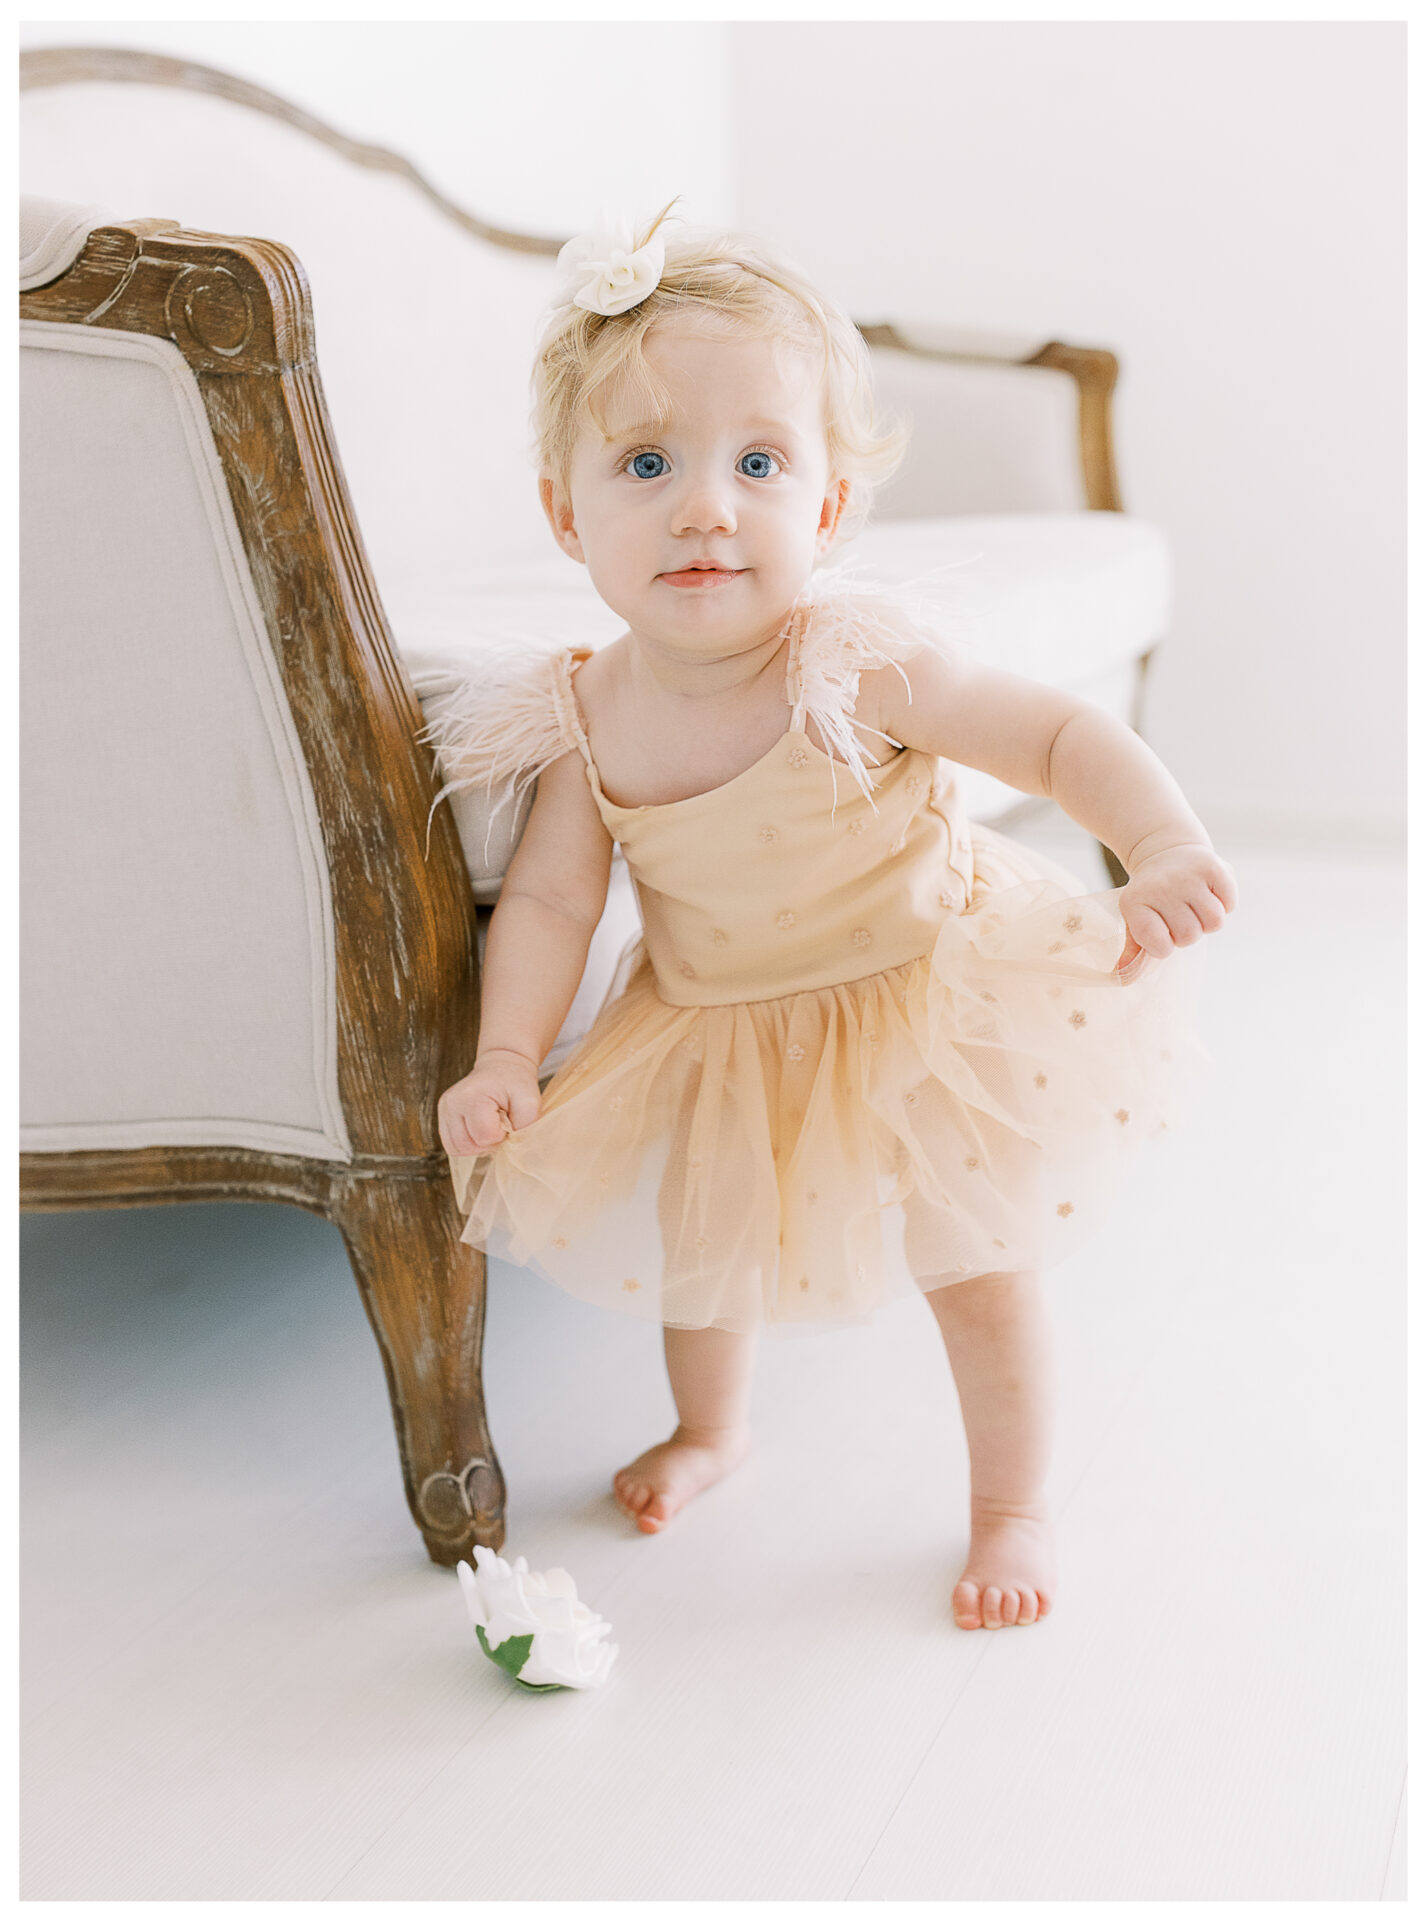 Winter Freire Photography | baby's first birthday celebration photos in a light and airy photography studio Dayton, Ohio